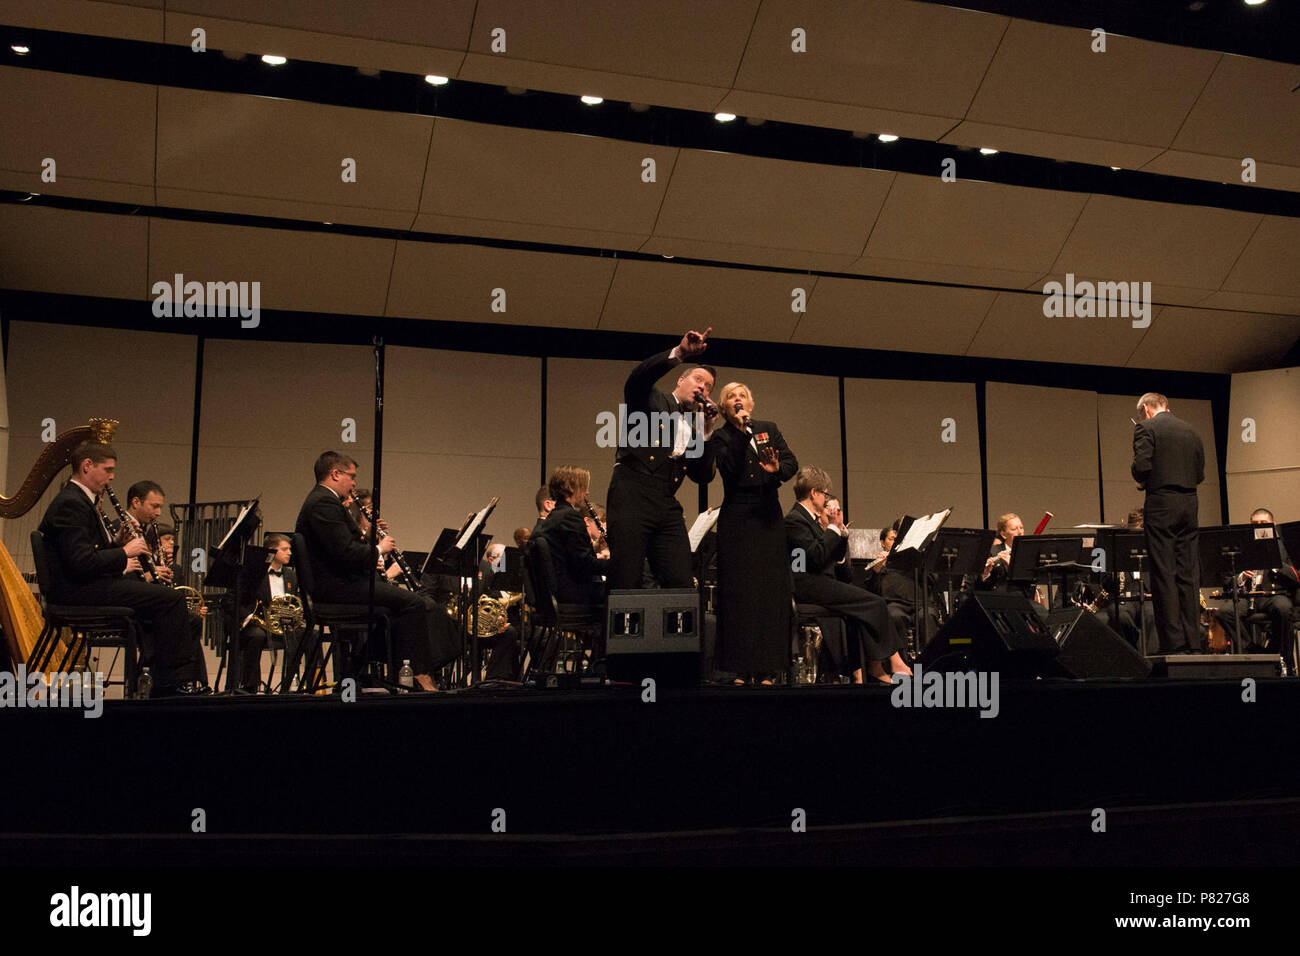 AMHERST, MASS (Mar. 6, 2016) Musician First Class Sarah Tietsort and Chief Musician Courtney Williams perform a duet with the United States Navy Band at the University of Massachussetts Fine Arts Center in Amherst, Mass. The U.S. Navy Band is on a 25-day tour of the northeastern United States. Stock Photo